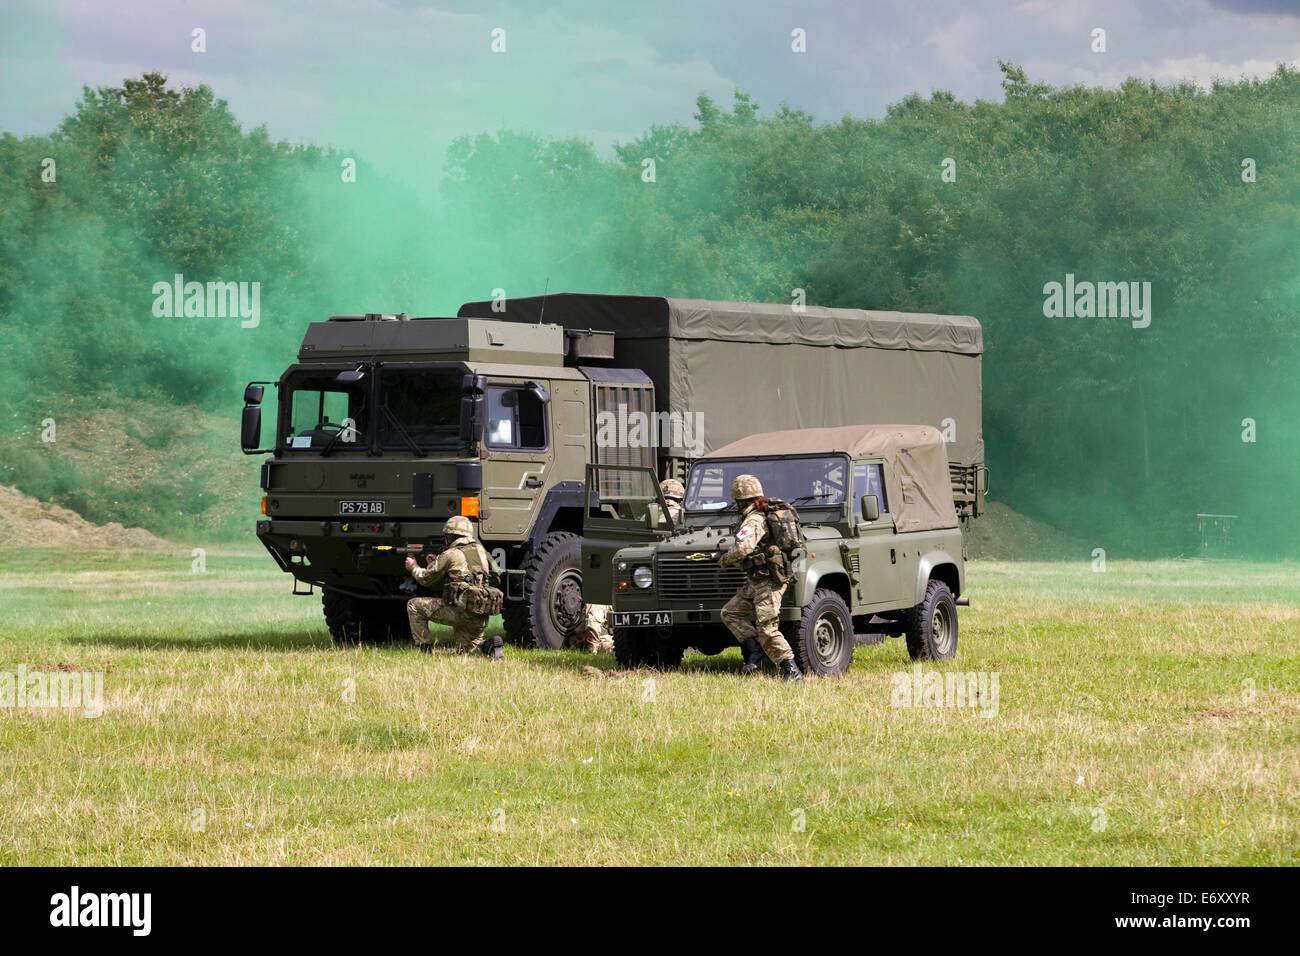 The MAN Support Vehicle Under attack at a reenactment Stock Photo